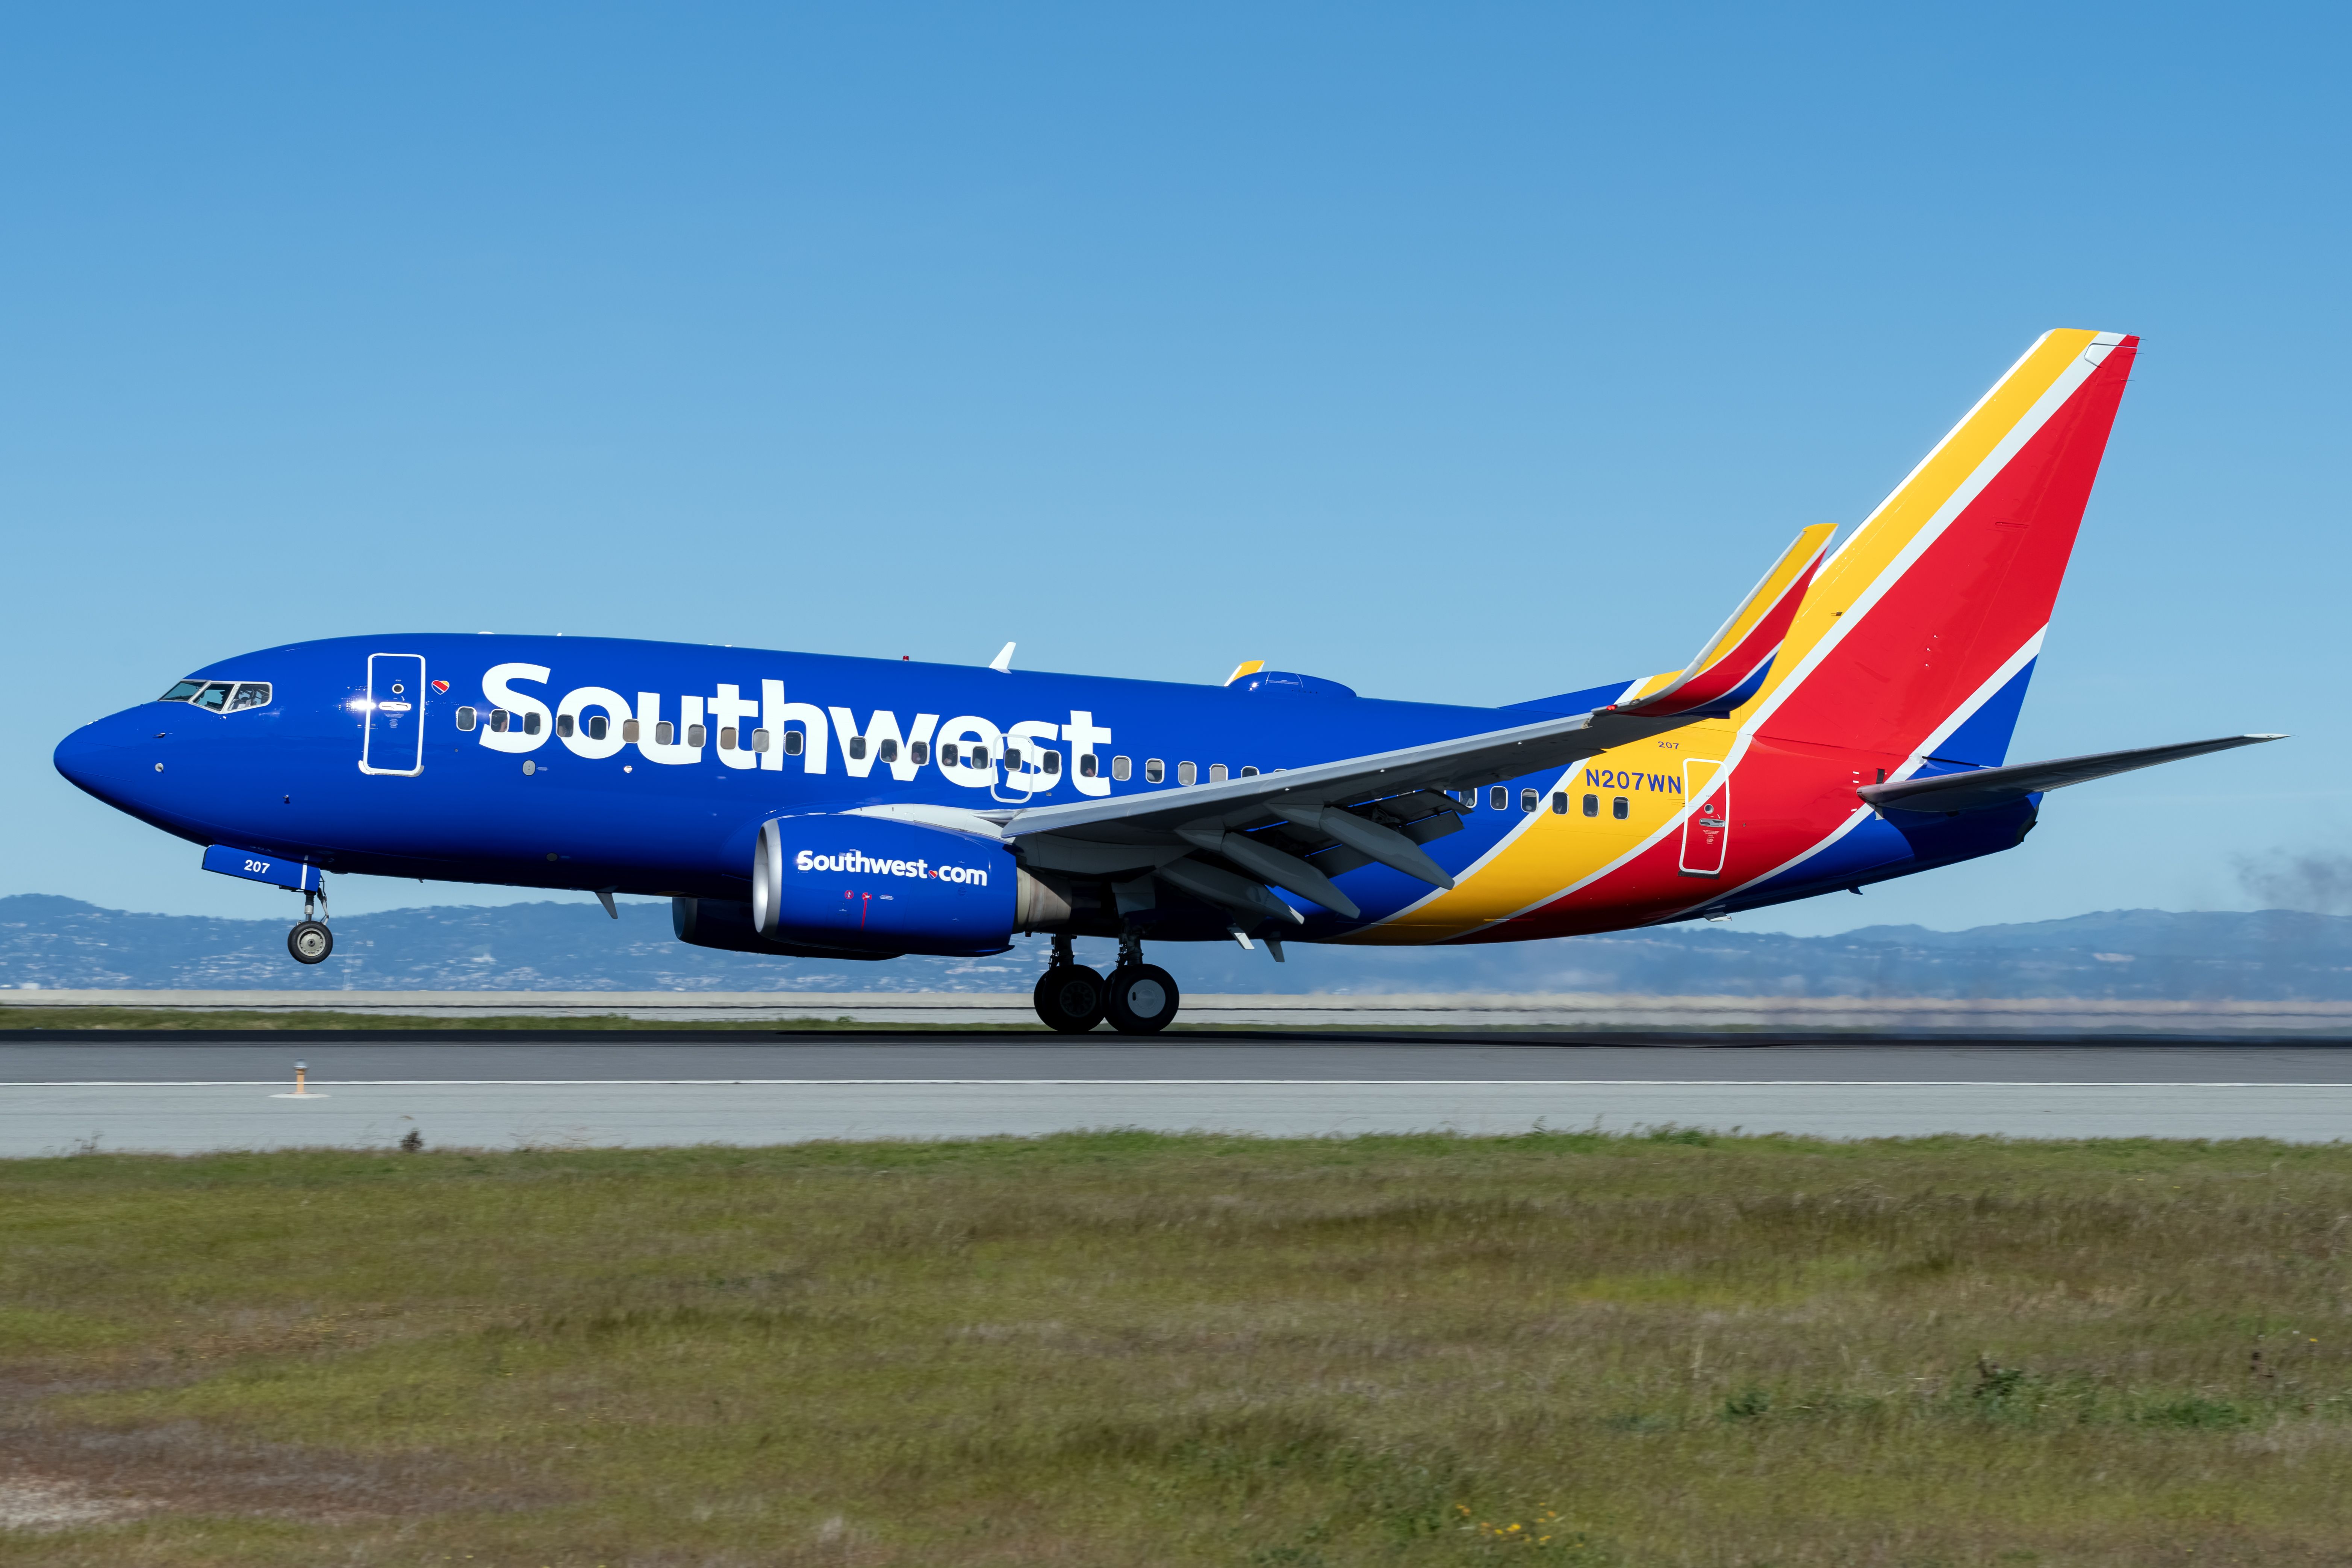 A Southwest Airlines Boeing 737-700 registration N207WN